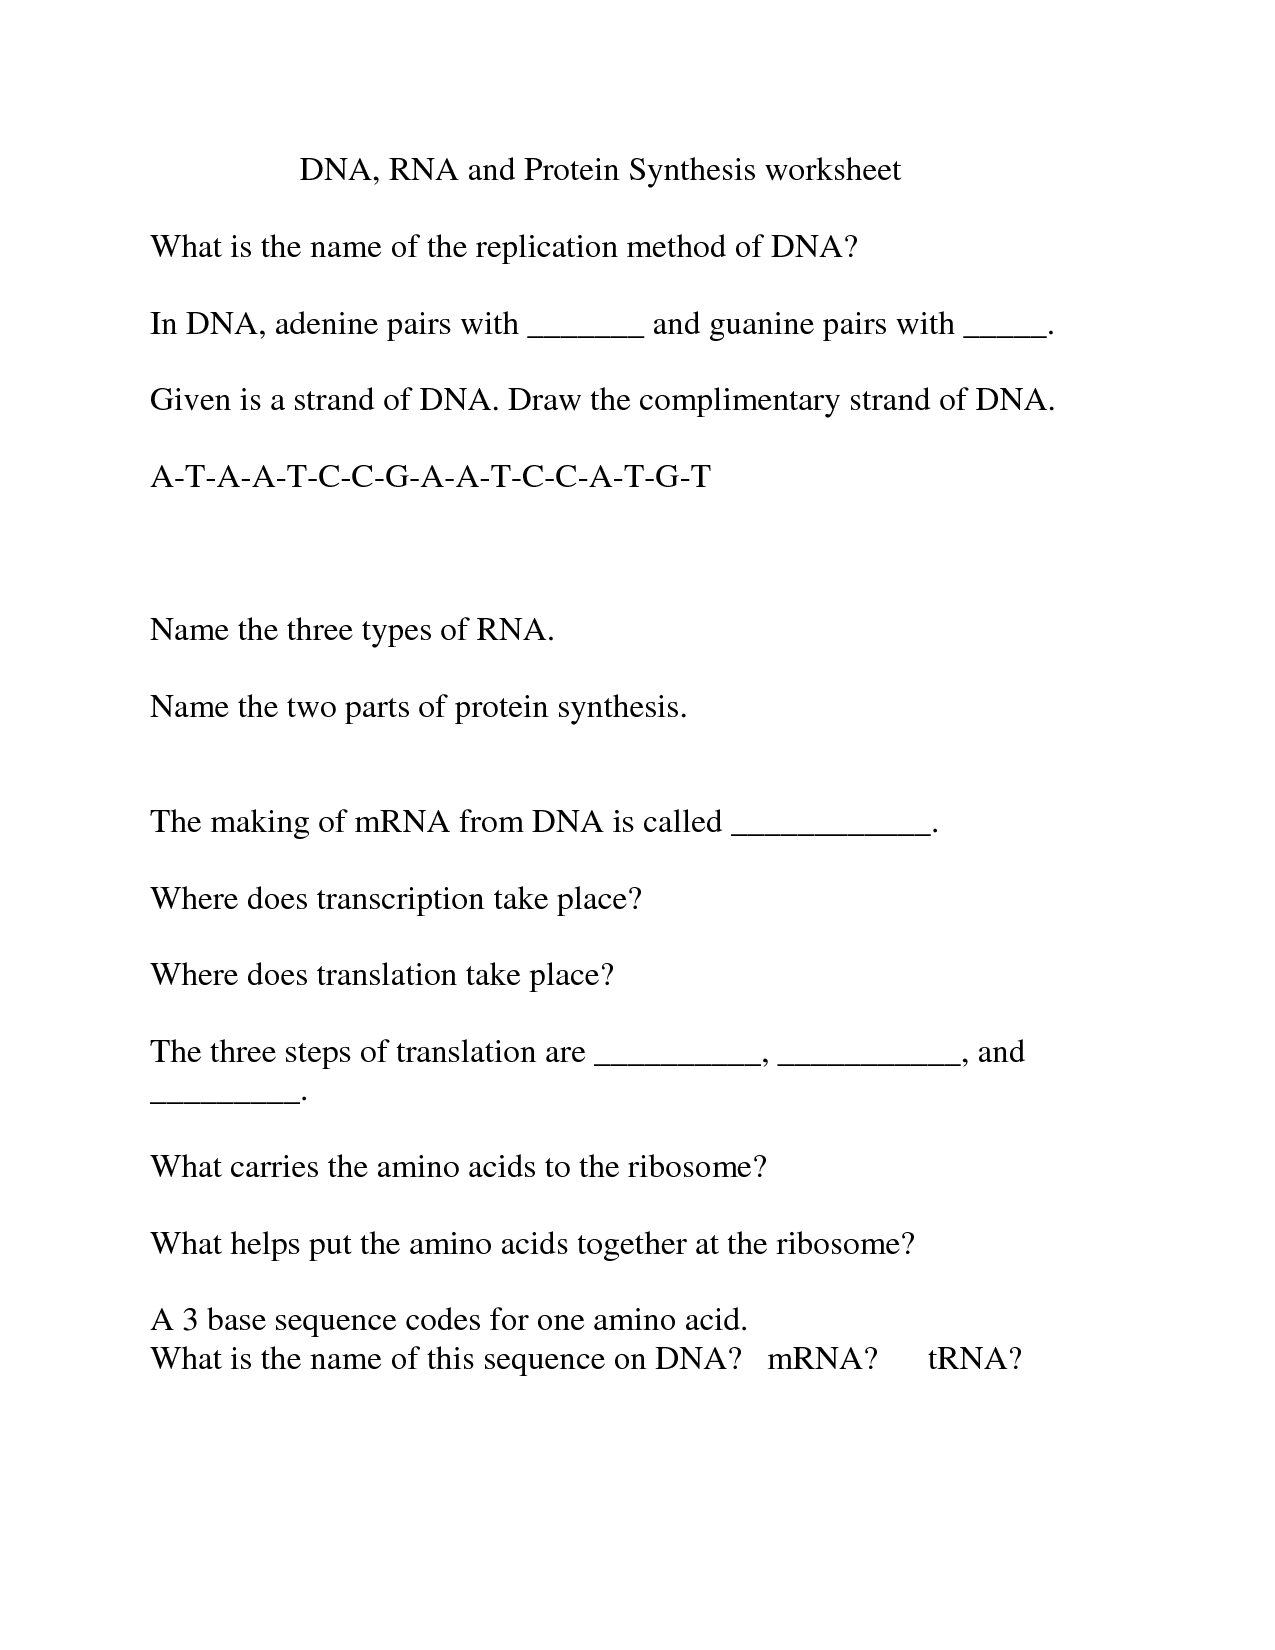 Protein Synthesis Worksheet DNA and RNA Image